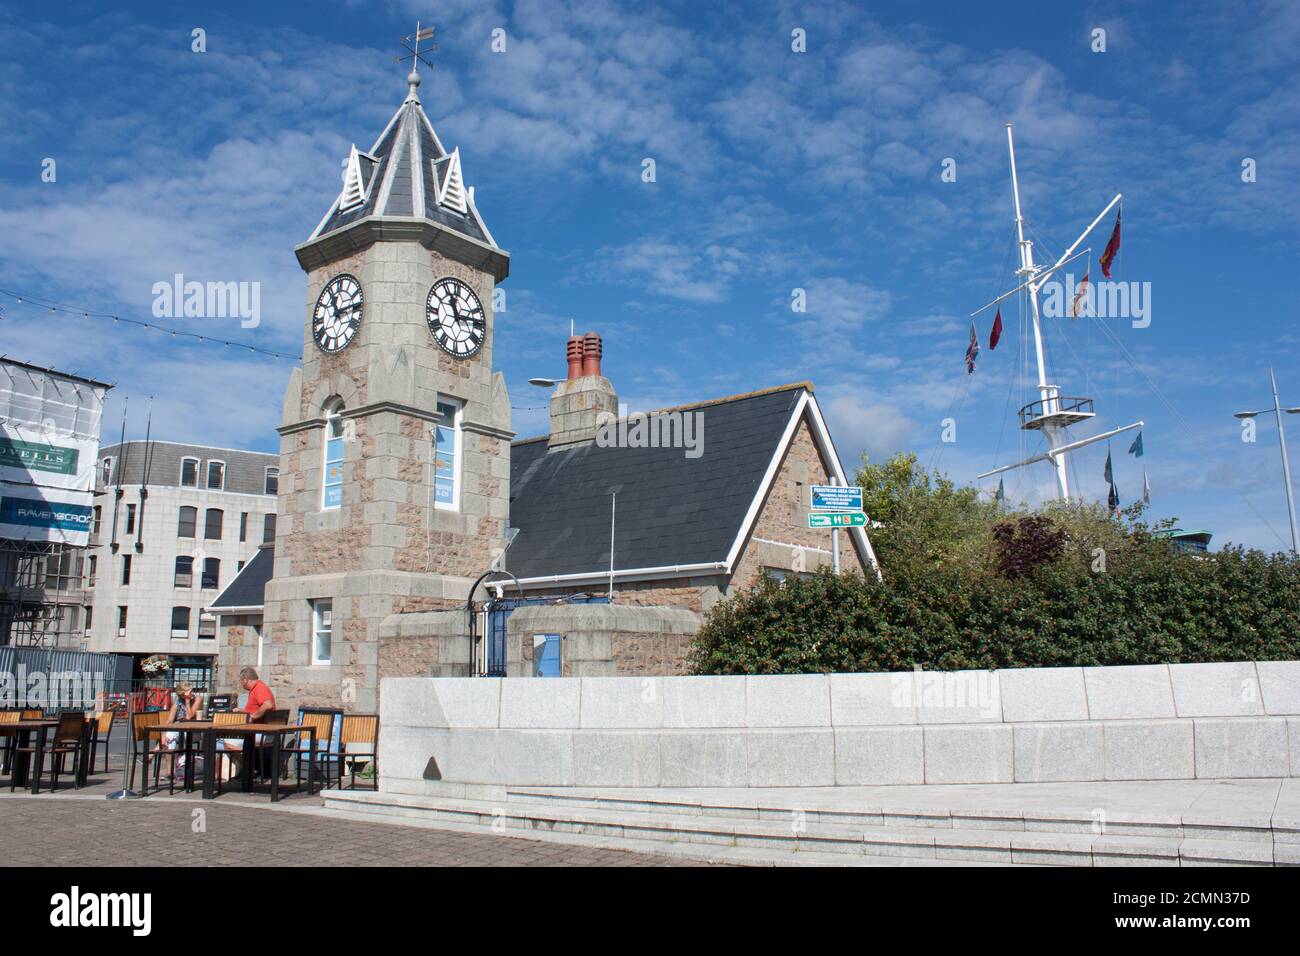 Channel Islands. Guernsey. St Peter Port. Weighbridge Clock Tower building and roundabout flag pole. Stock Photo